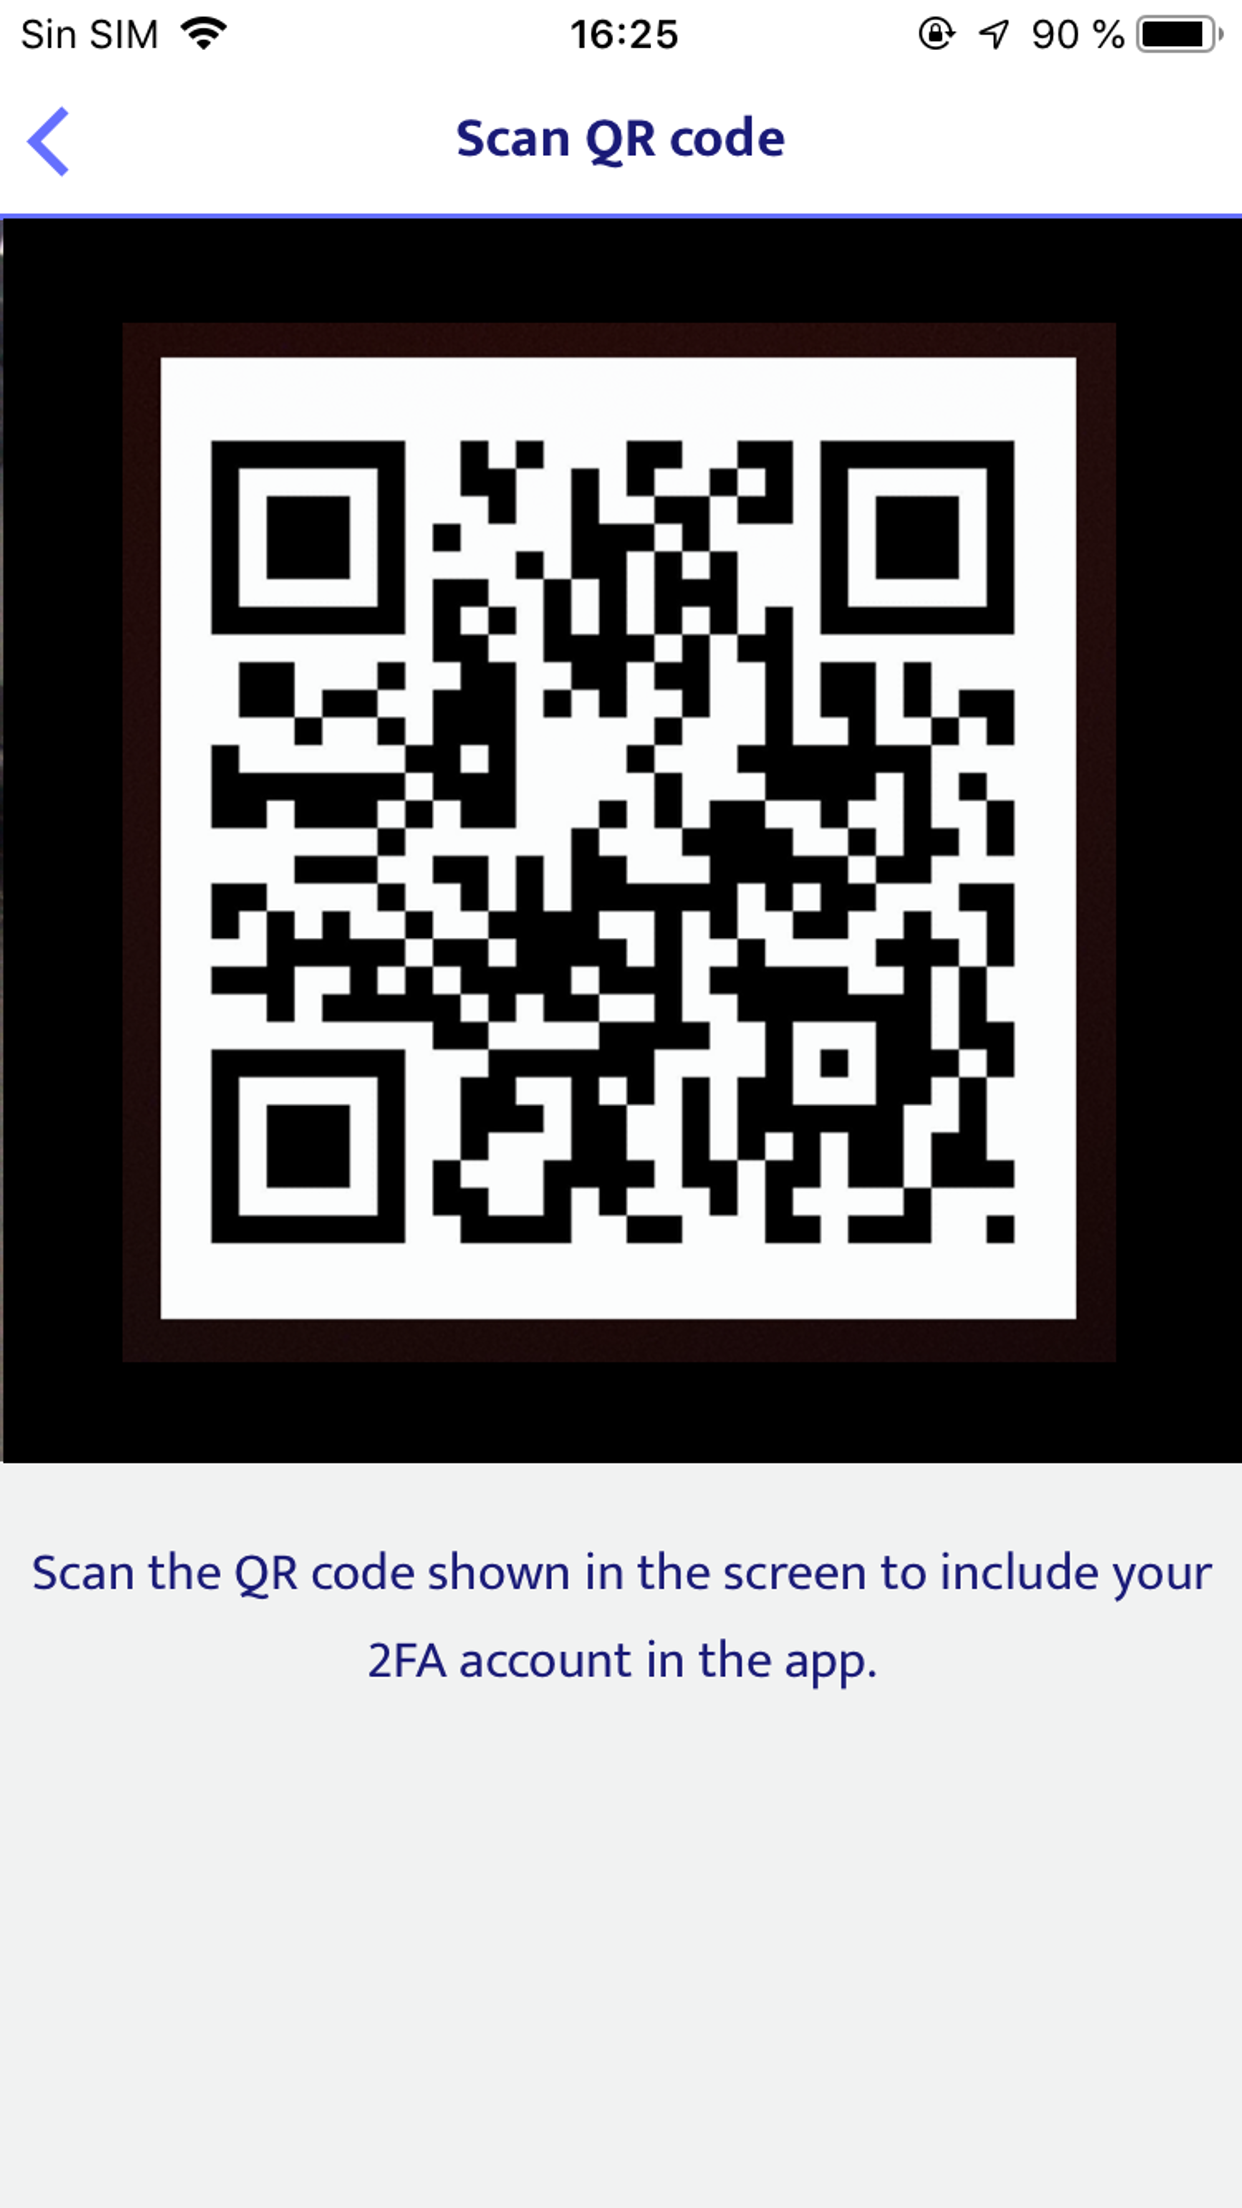 How to scan qr code